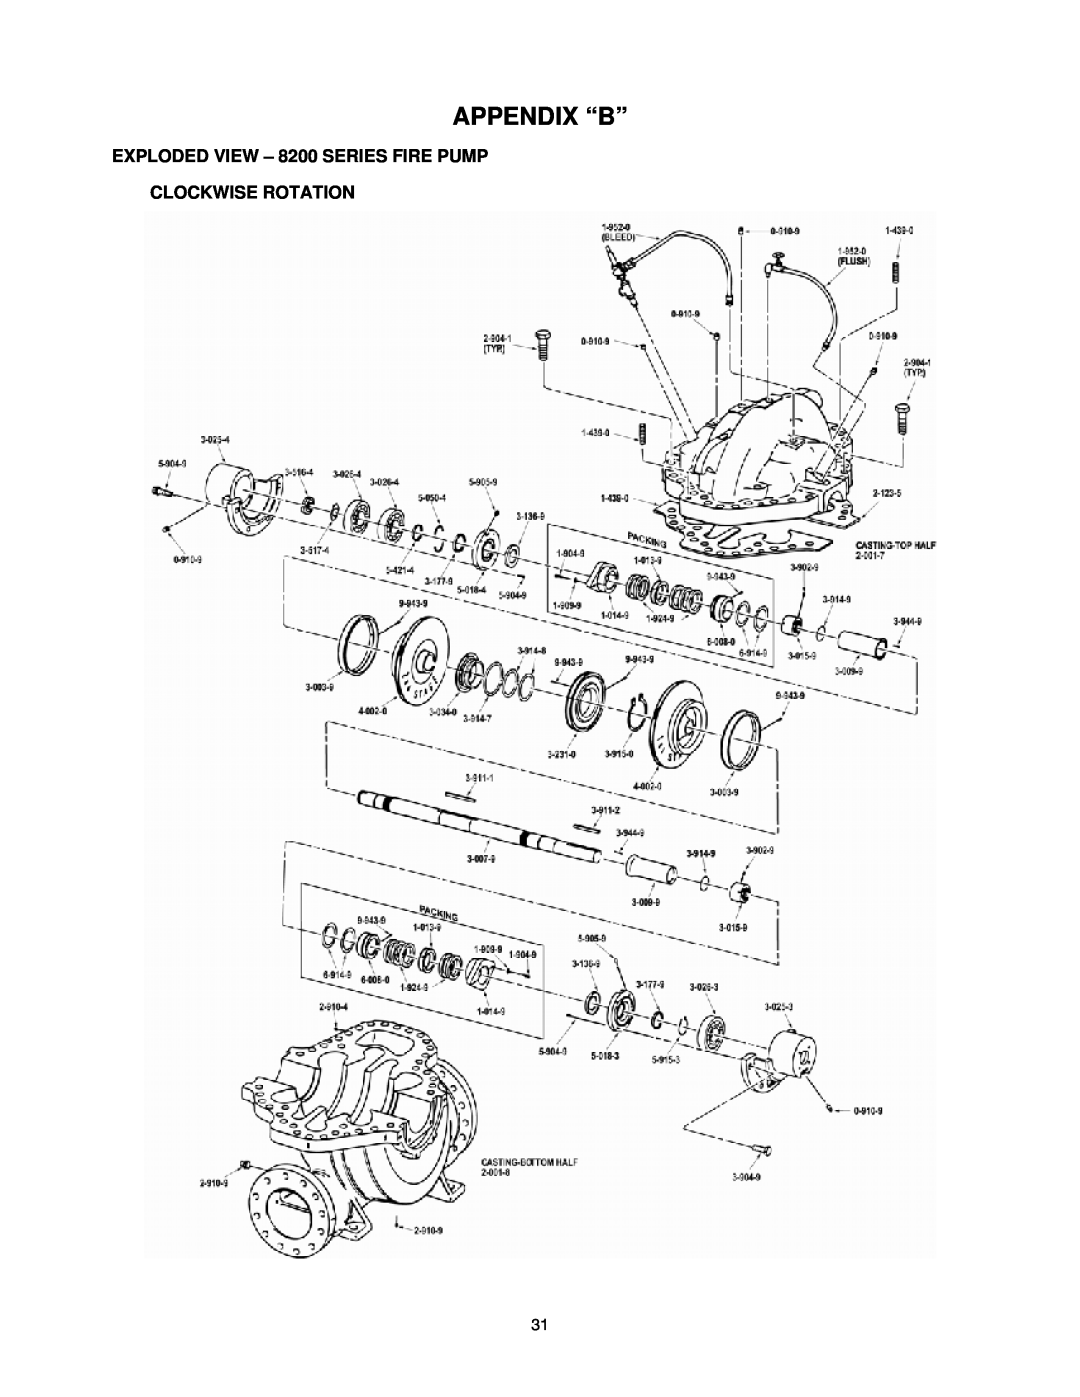 AC International 8200 Series instruction manual Appendix “B”, EXPLODED VIEW - 8200 SERIES FIRE PUMP, Clockwise Rotation 